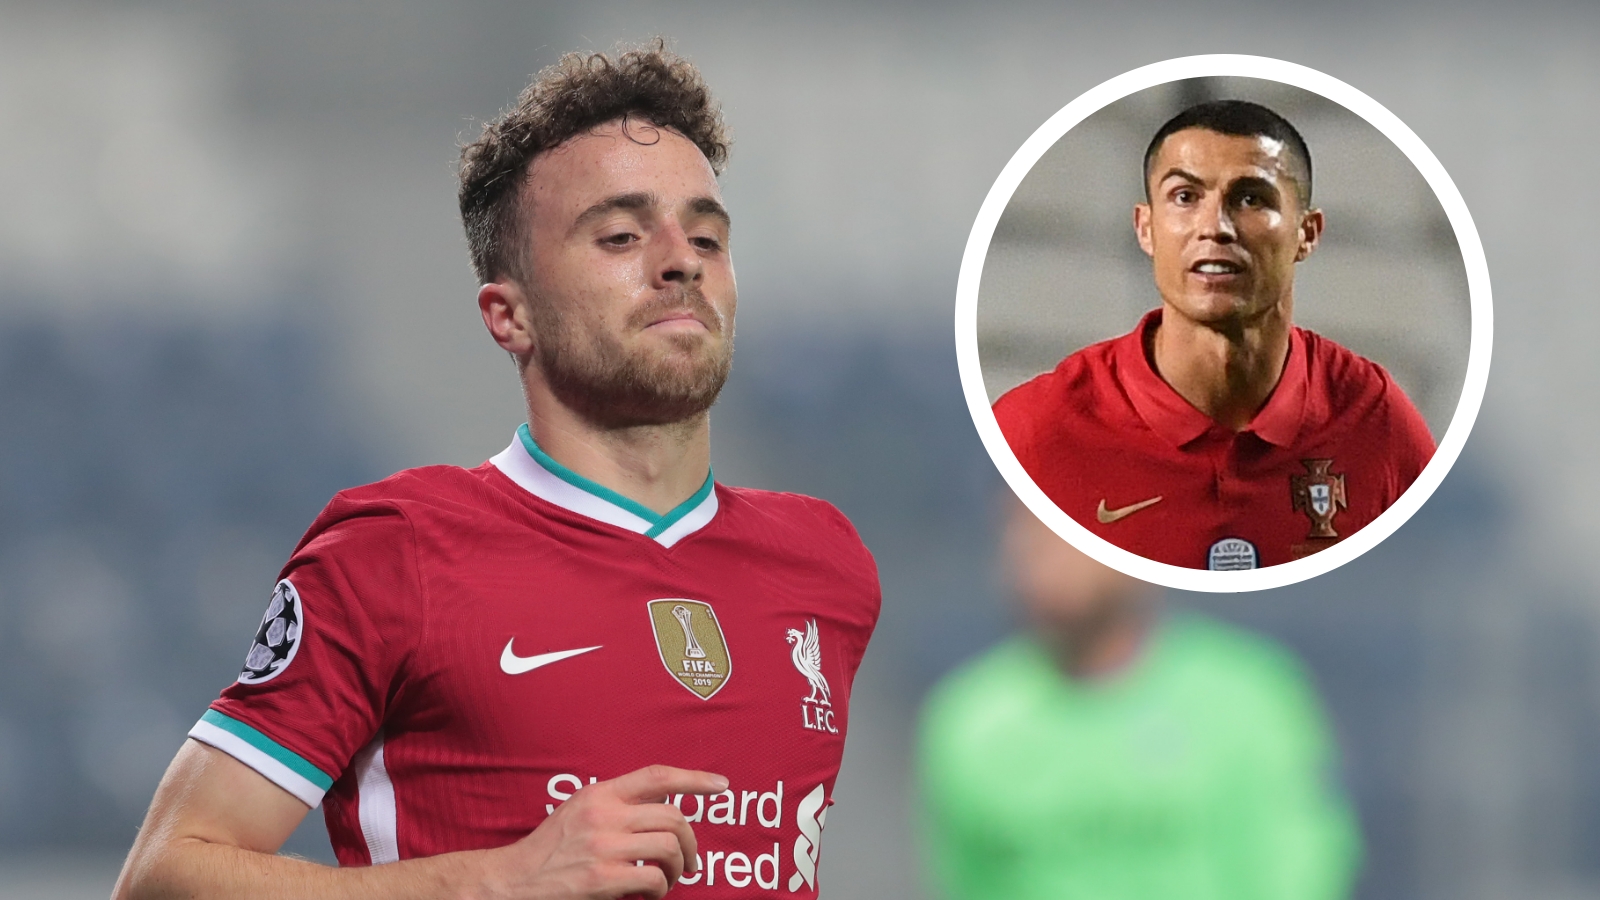 Jota tipped to be Ronaldo’s successor by former coach as he lives up to big billing with Liverpool